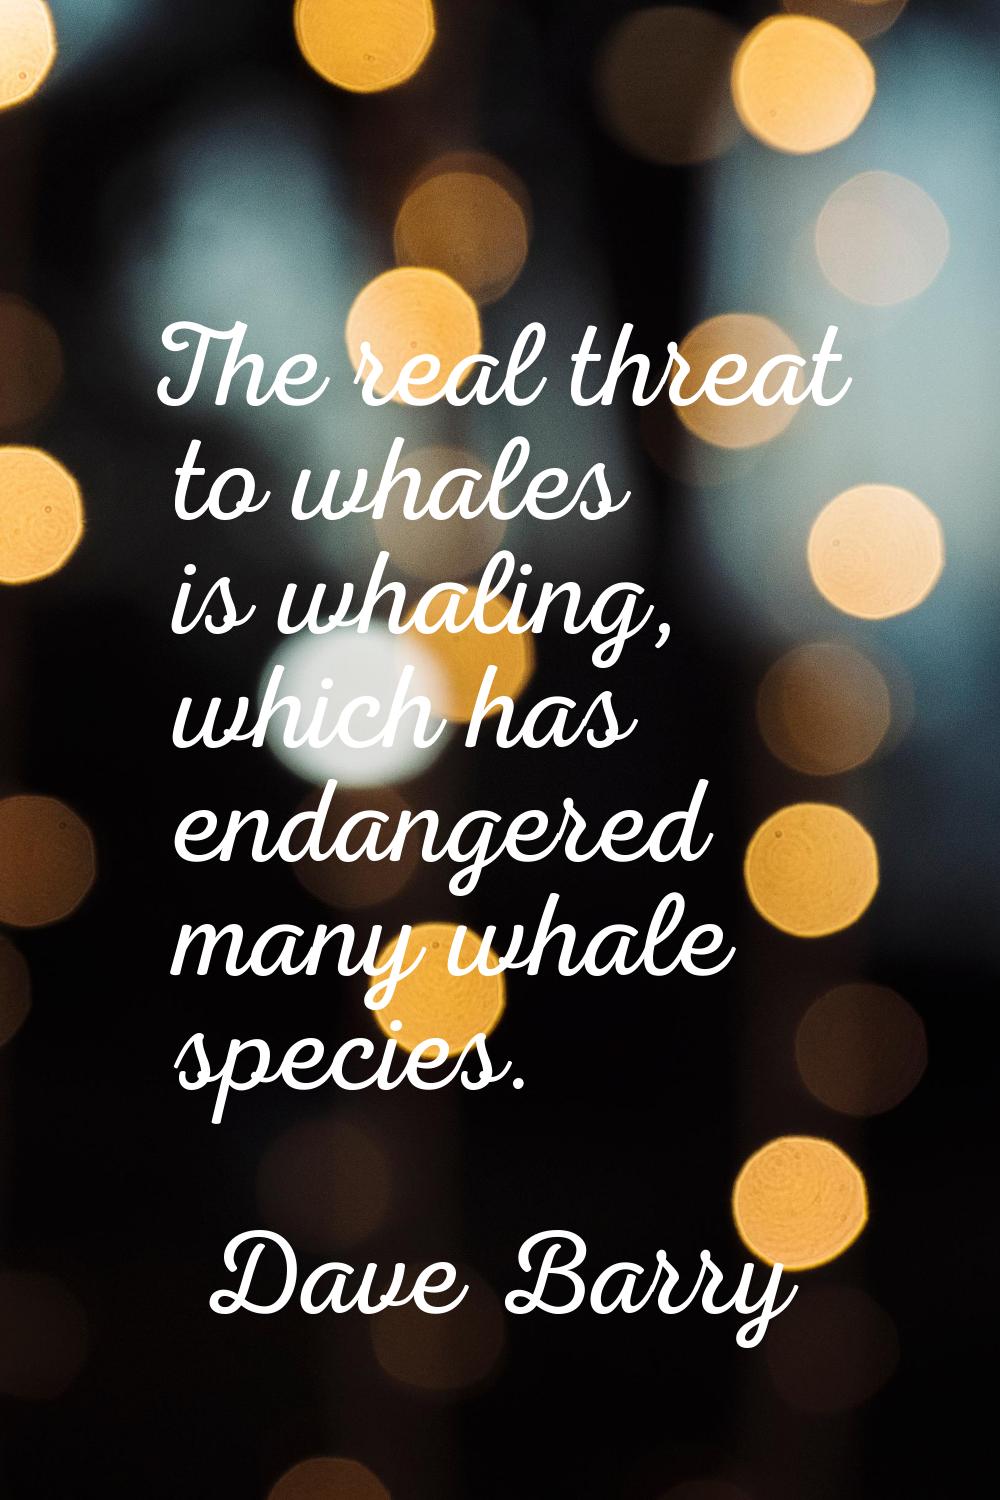 The real threat to whales is whaling, which has endangered many whale species.